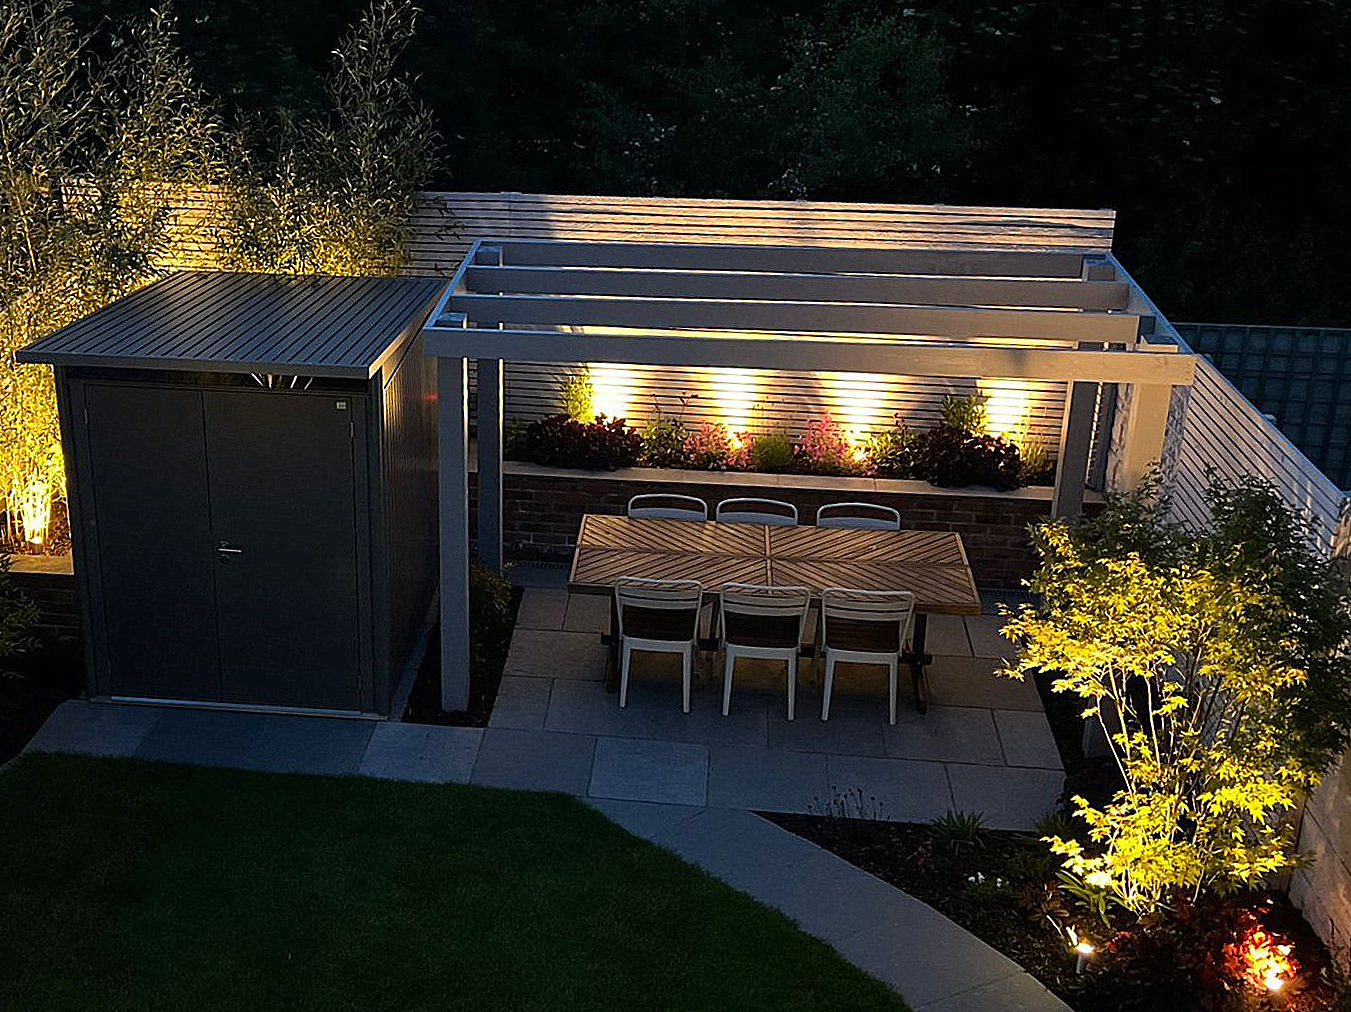 Revitalise your garden after dark with our stunning range of outdoor LED garden lighting  | we offer design & installation services in Dublin